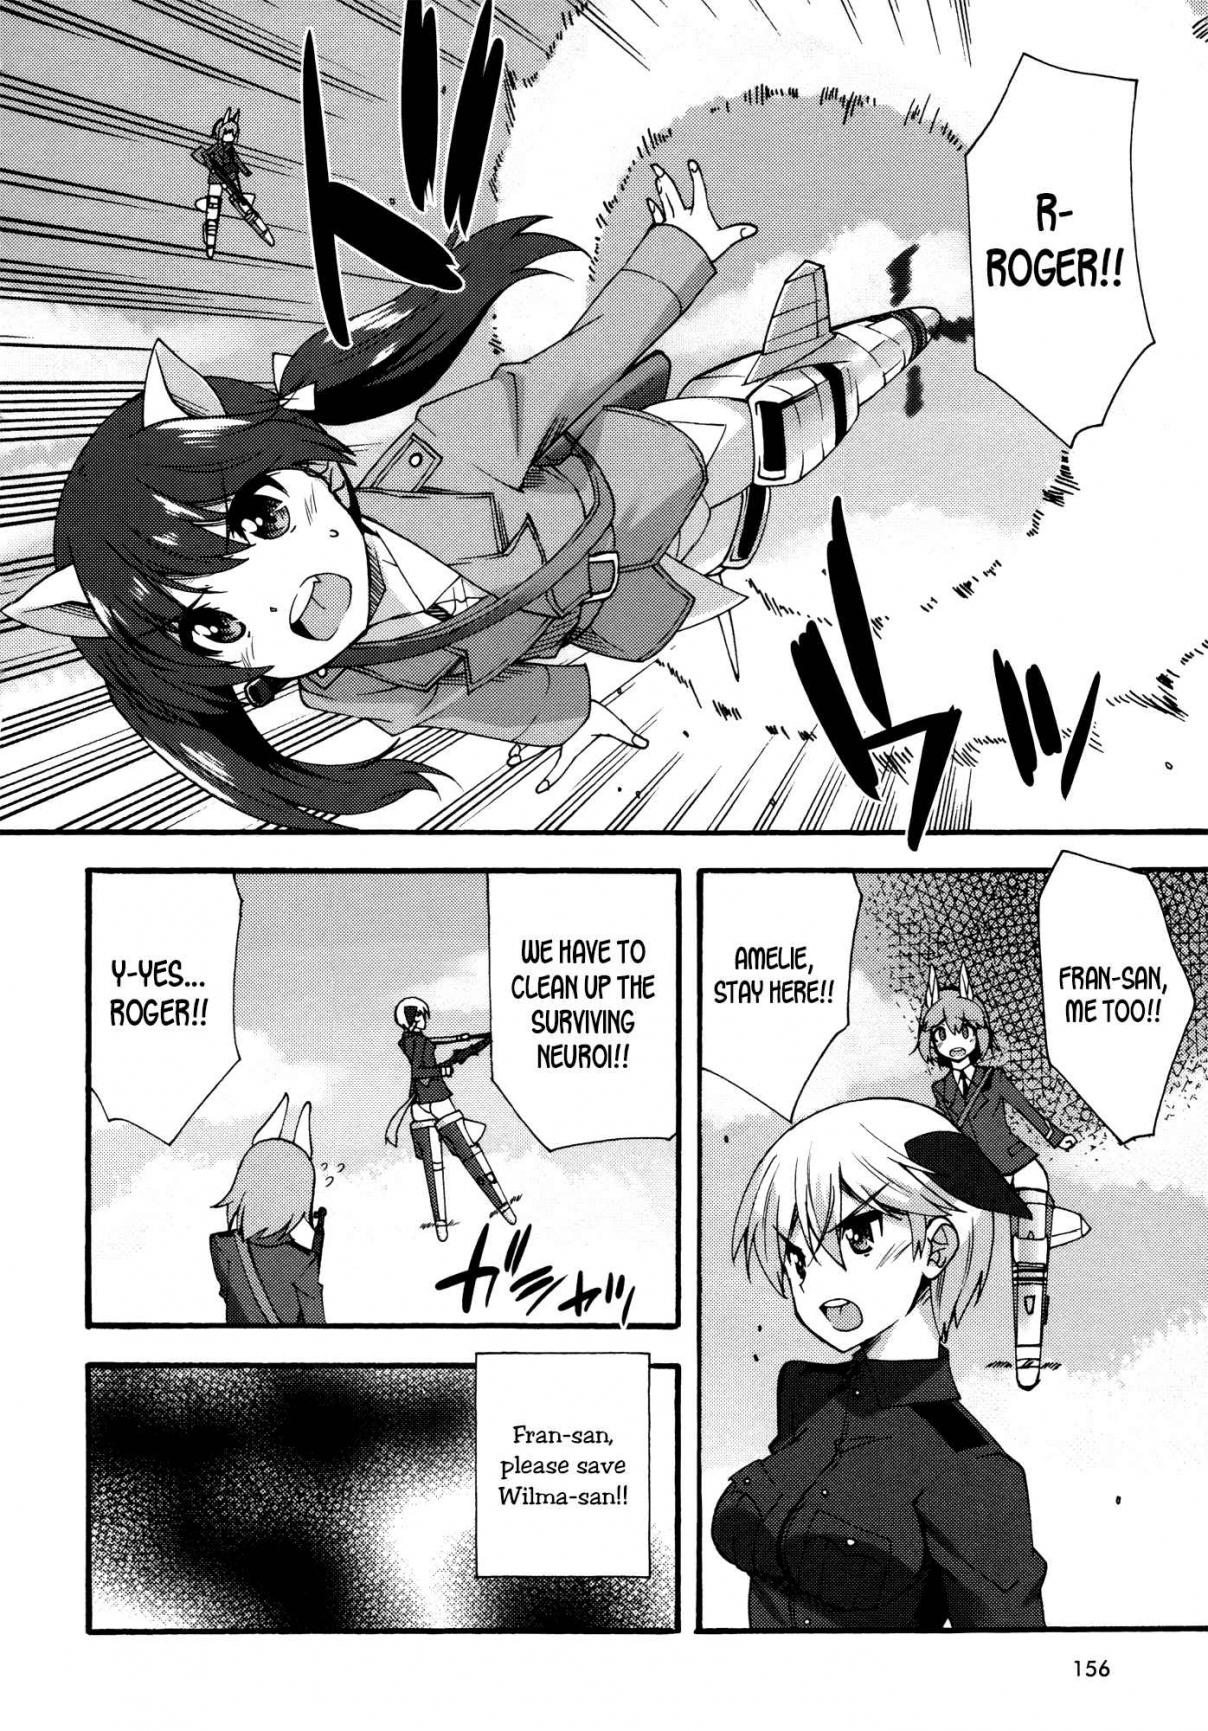 Strike Witches One Winged Witches Vol. 2 Ch. 14 My Wings